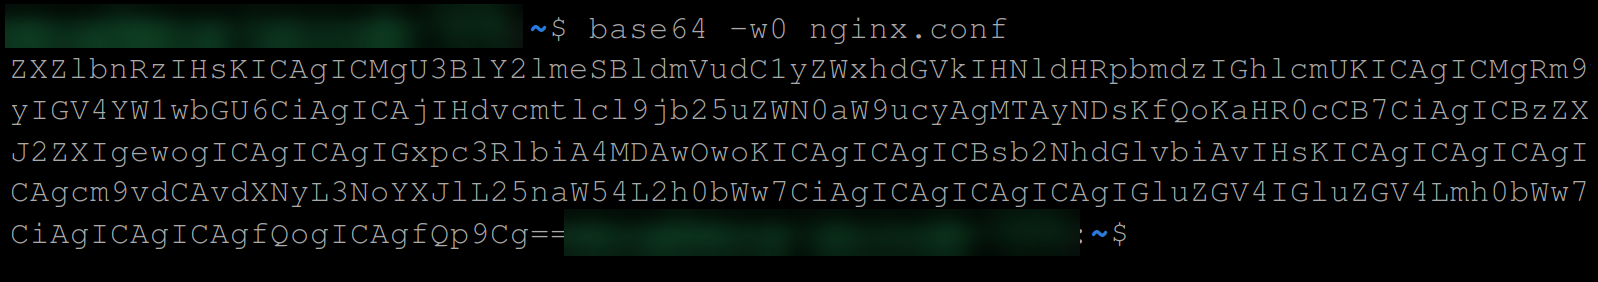 Converting the contents of the nginx.conf file to base64 encoded value